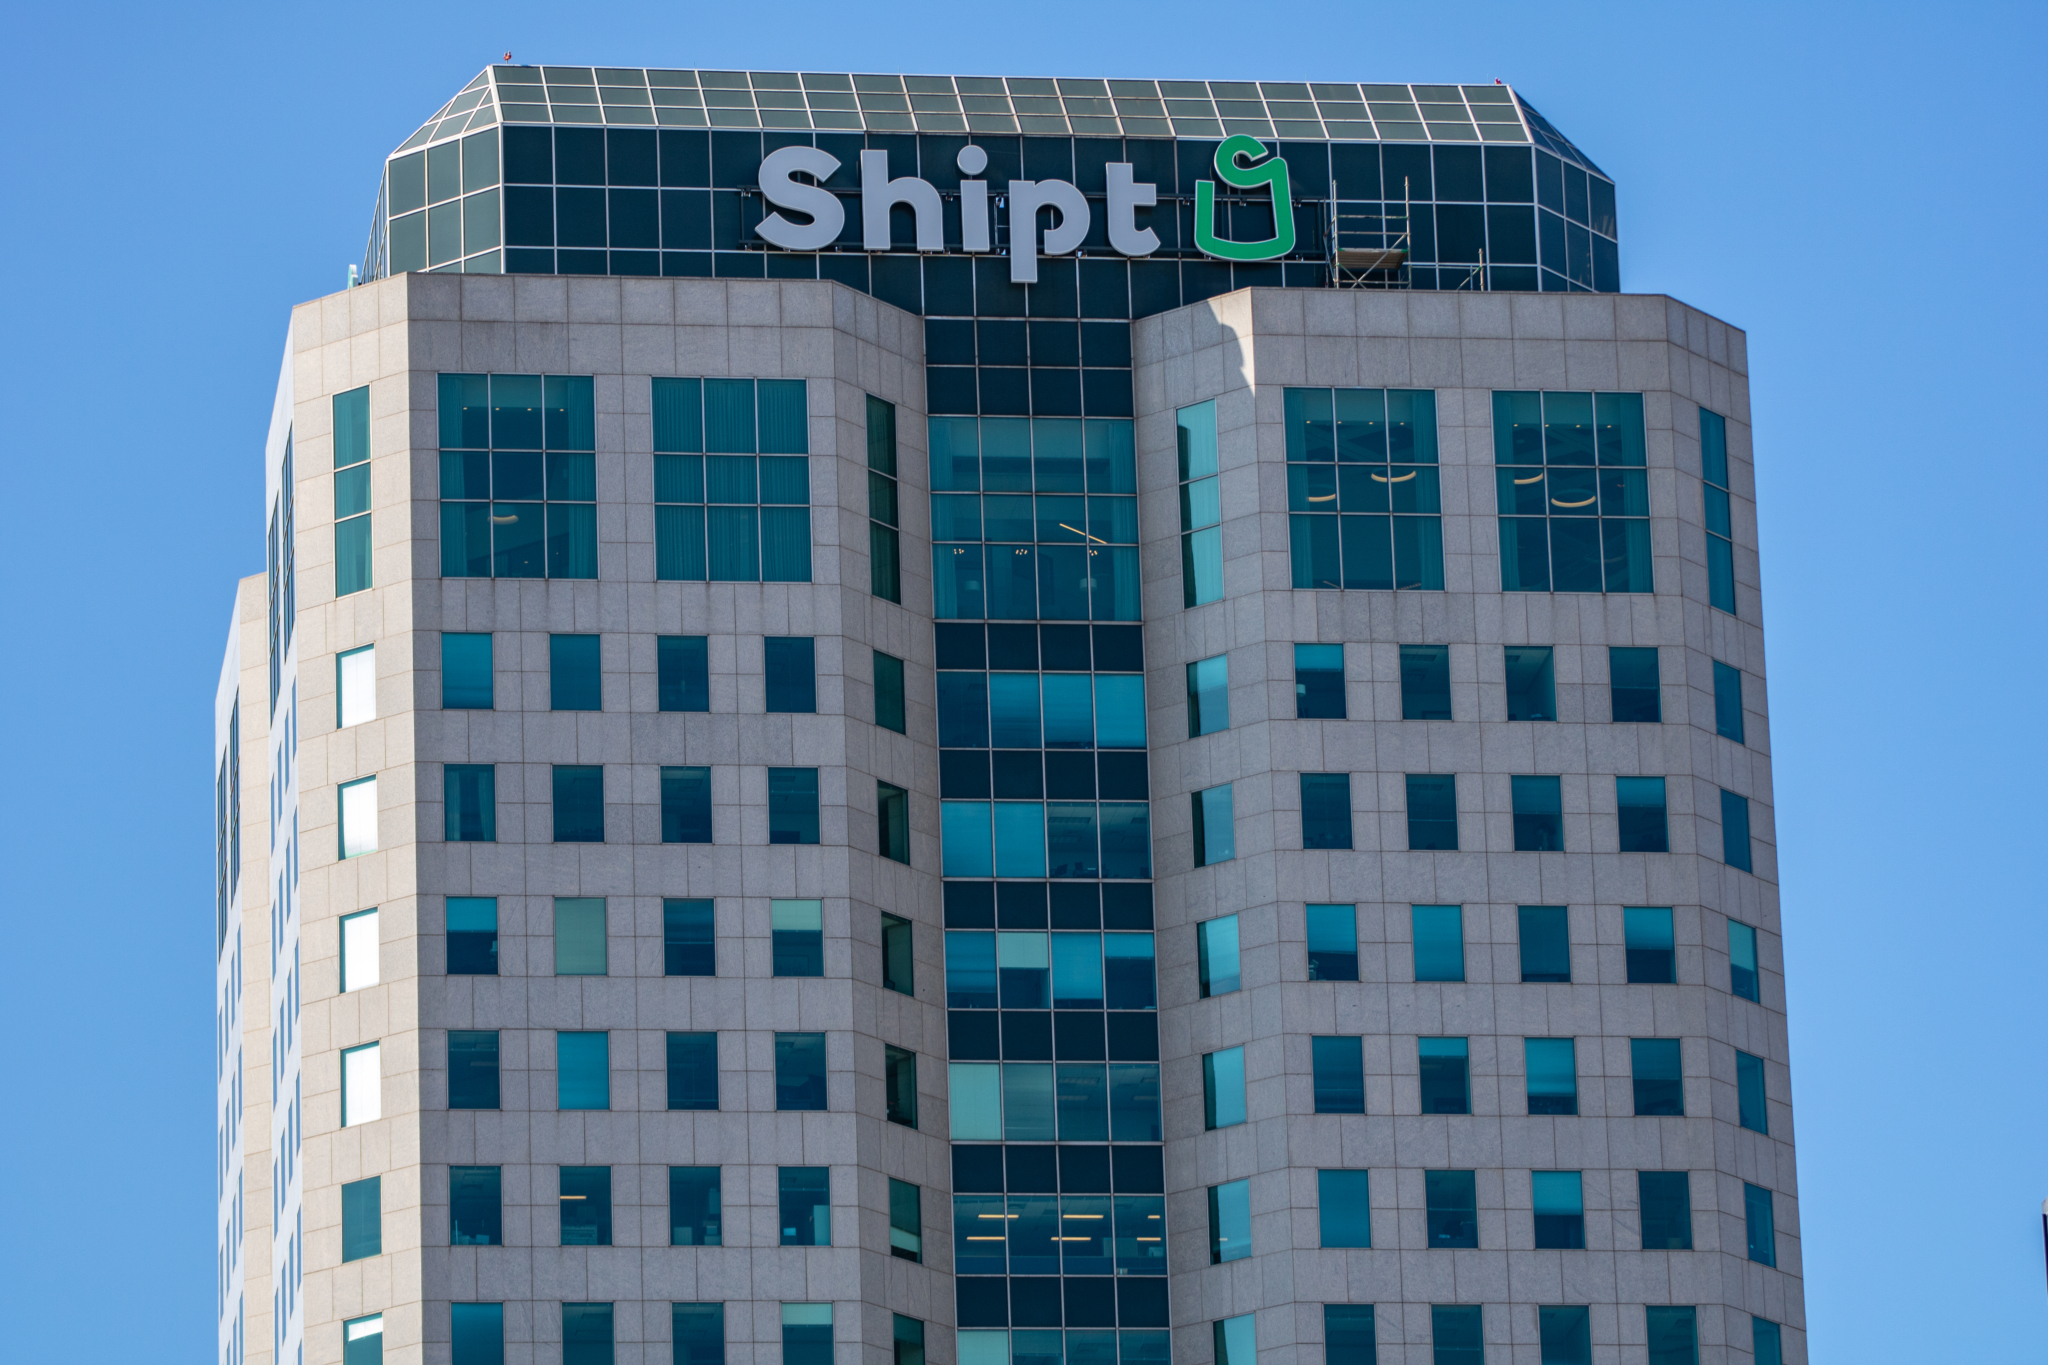 Shipt, whose exist provided some of the inspiration for Harmony Venture Labs